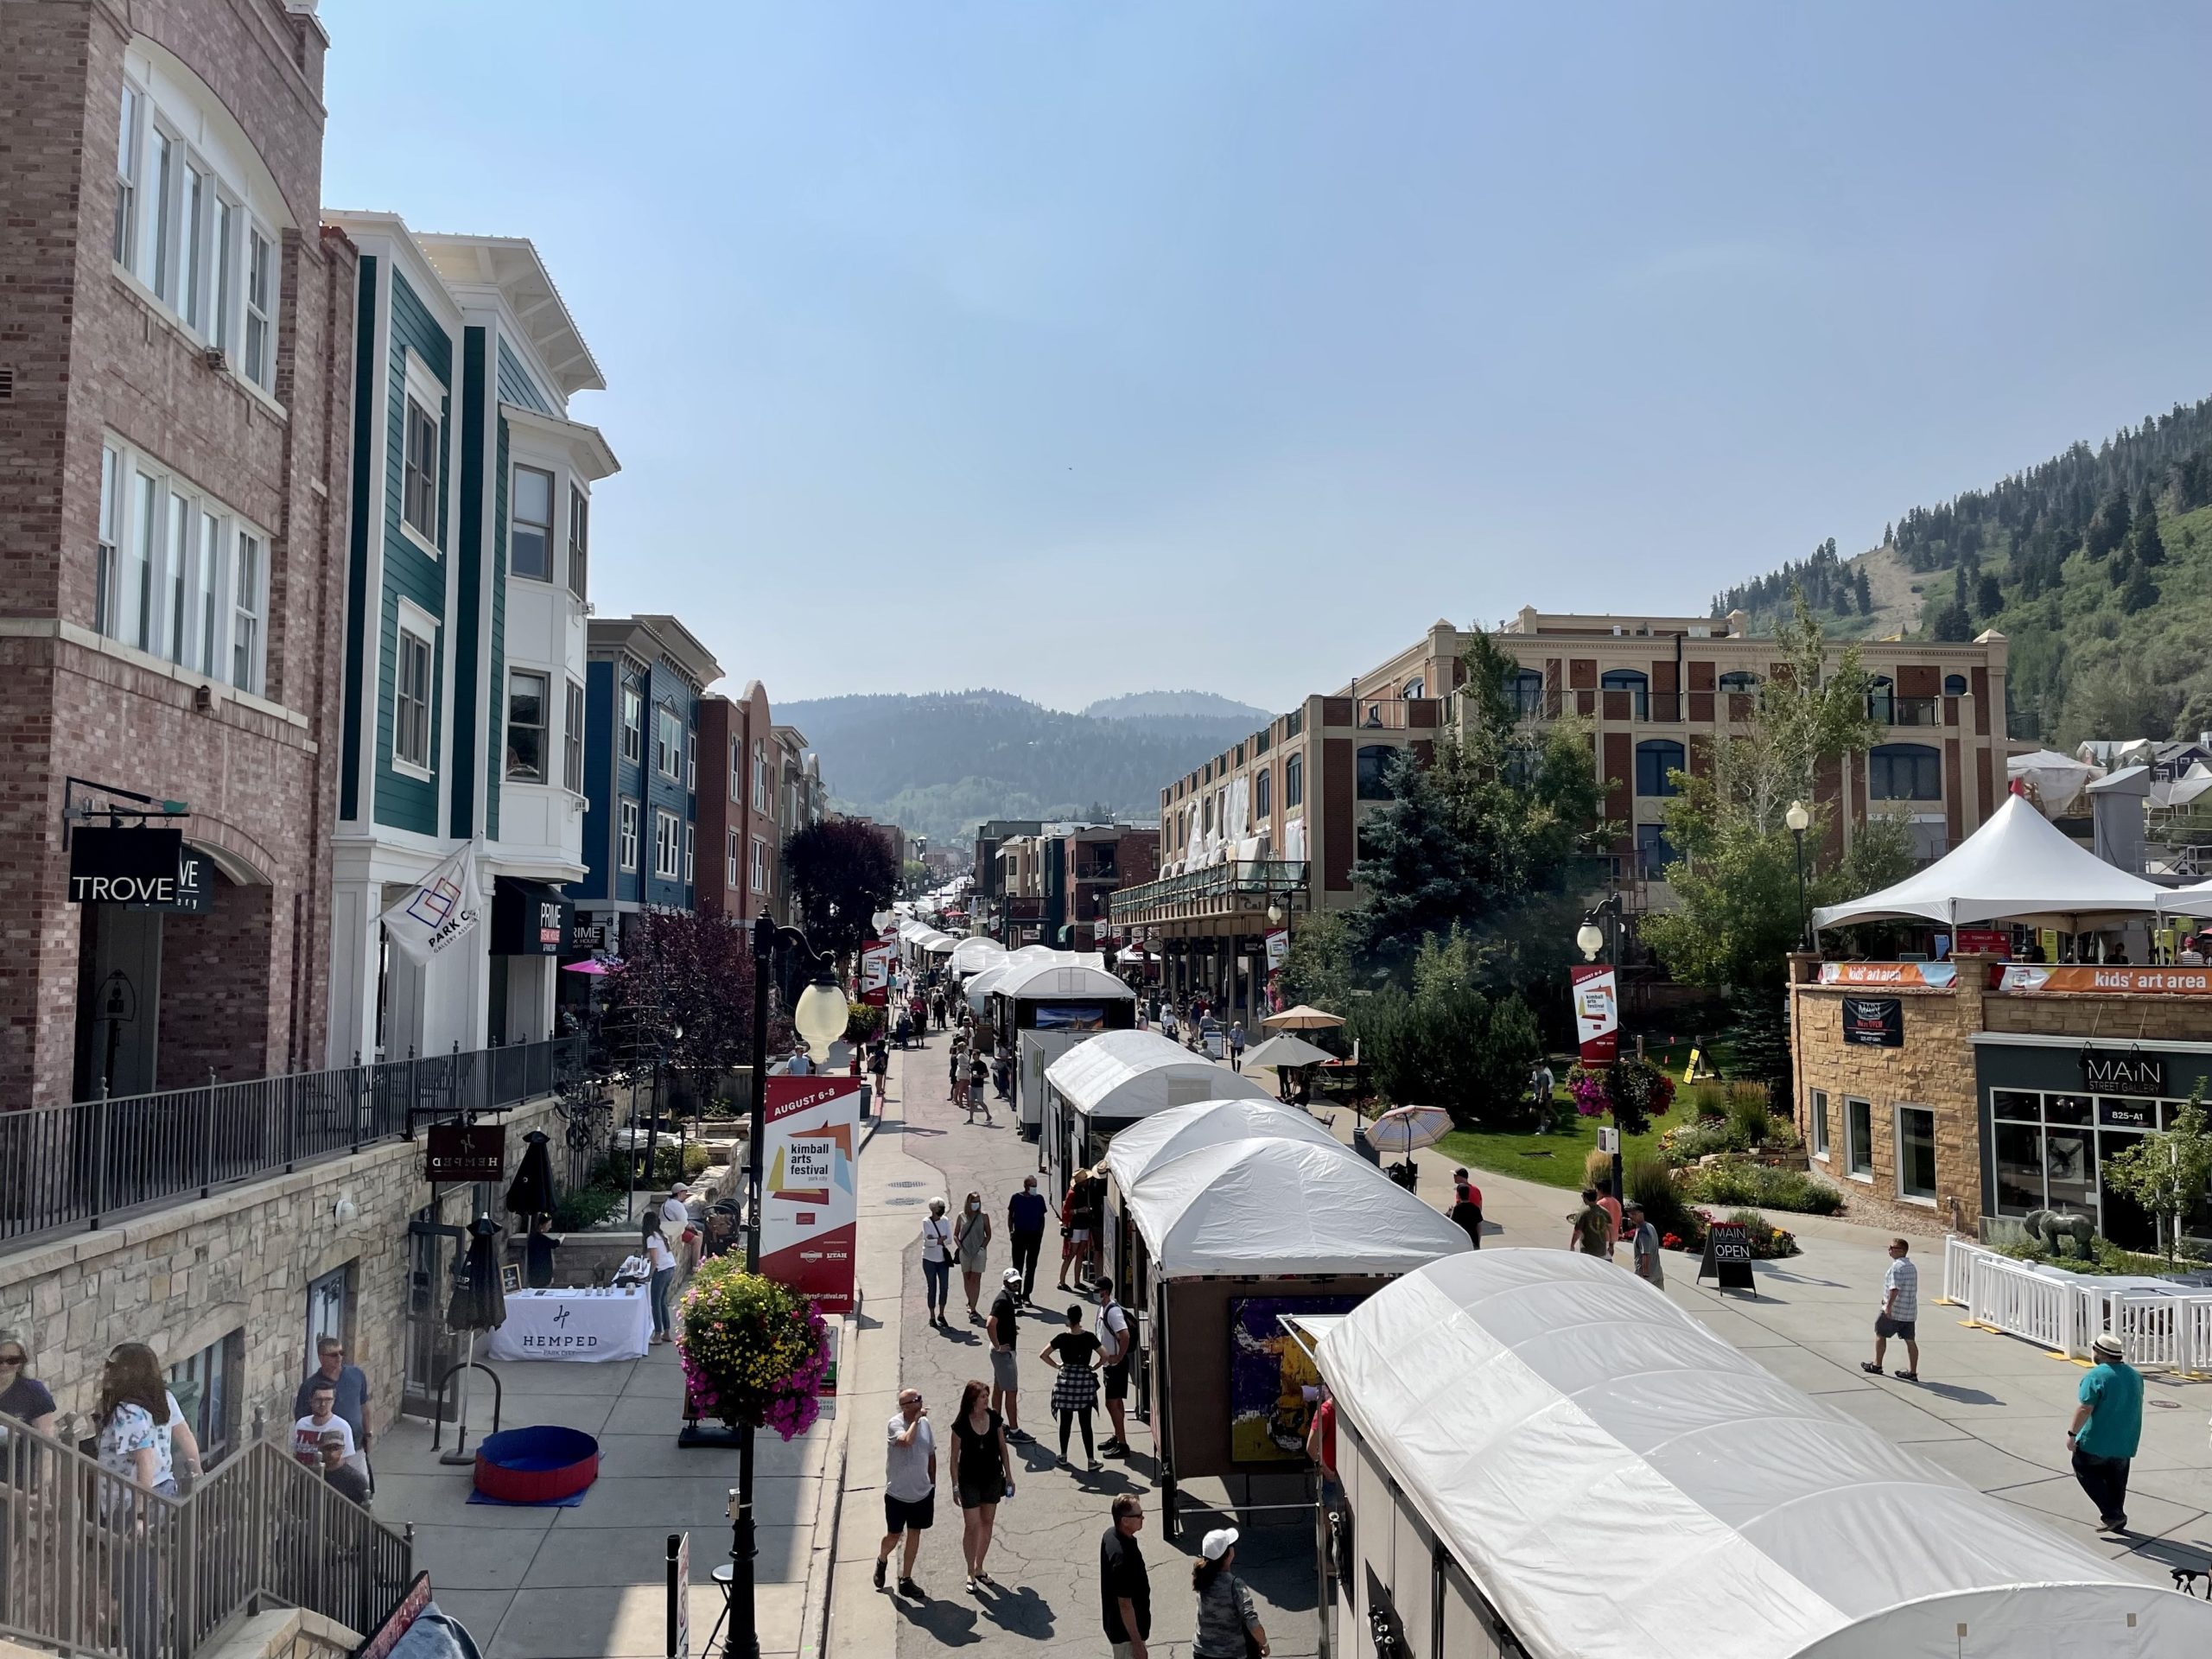 A smoky but successful Kimball Arts Festival TownLift, Park City News